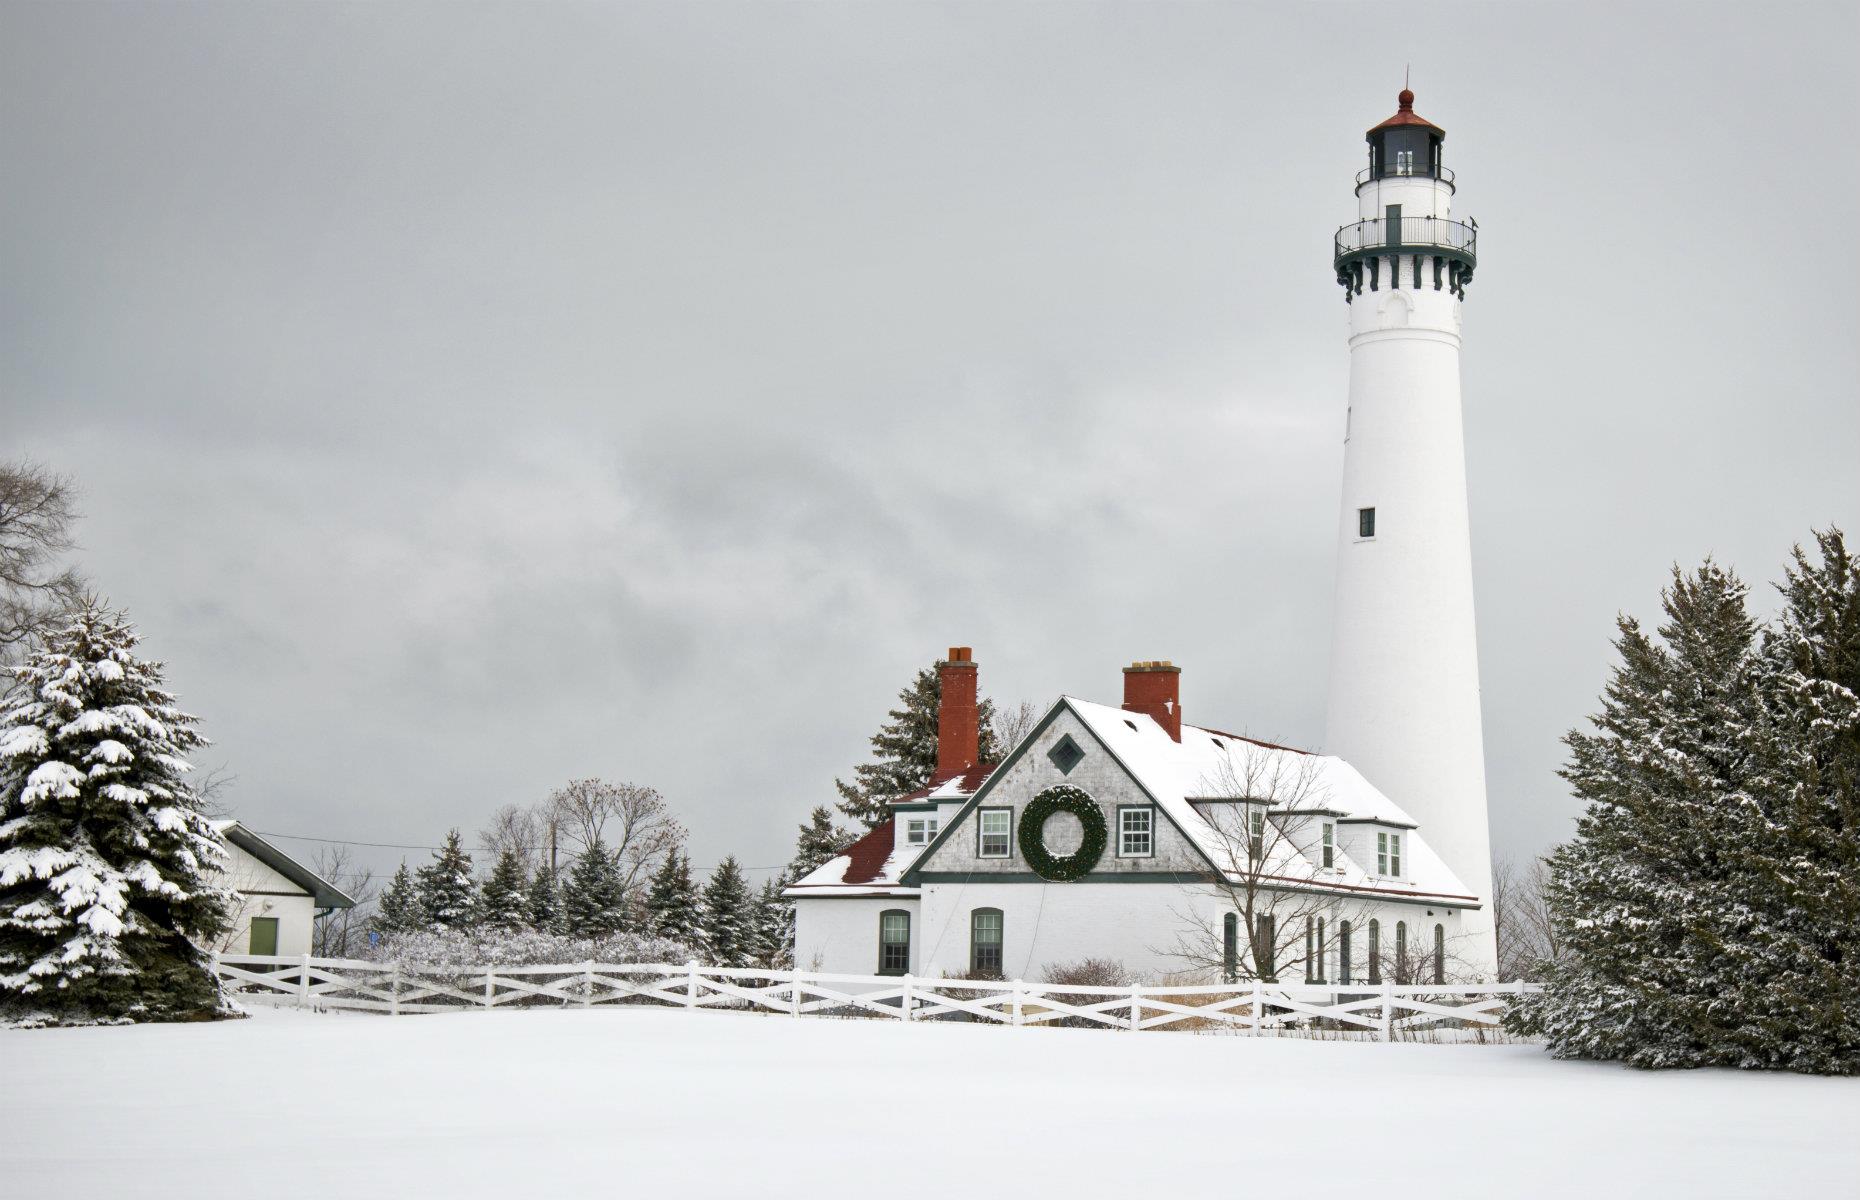 <p>Looking ultra-atmospheric in this wintry shot, the 108-foot (32m) tall Wind Point Lighthouse on Lake Michigan is one of the tallest and oldest in the Great Lakes region. It was first lit in 1880 and originally contained huge fog horns, whose signals could be heard up to 10 miles (16km) away, as well as a huge Fresnel lens which is now kept in the Coast Guard Keepers Quarters. Listed on the National Register of Historic Places in 1980, the light is still in operation today.</p>